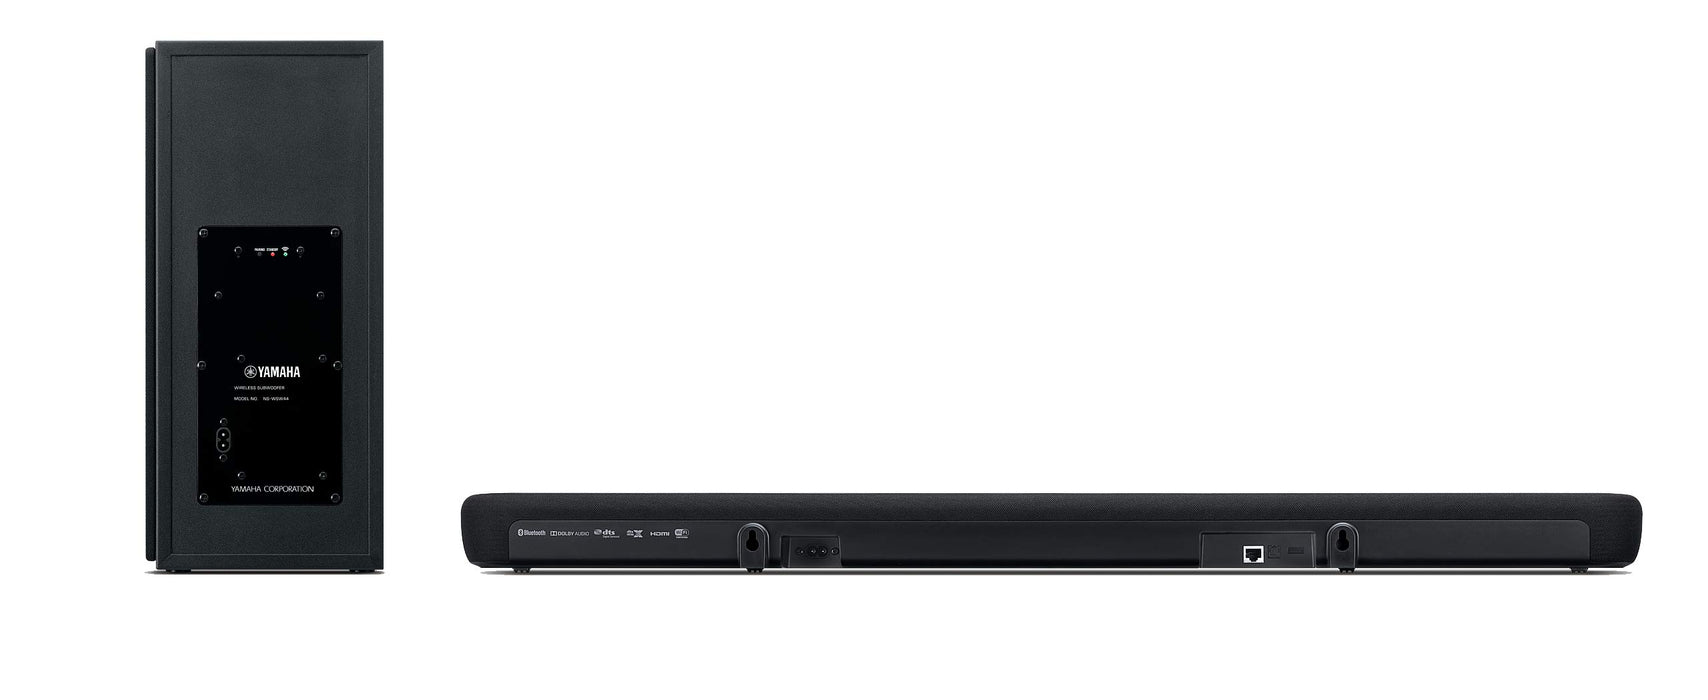 Yamaha YAS-209 Soundbar with wubwoofer- TV Speaker with Integrated Alexa Voice control & Wireless Subwoofer, in Black